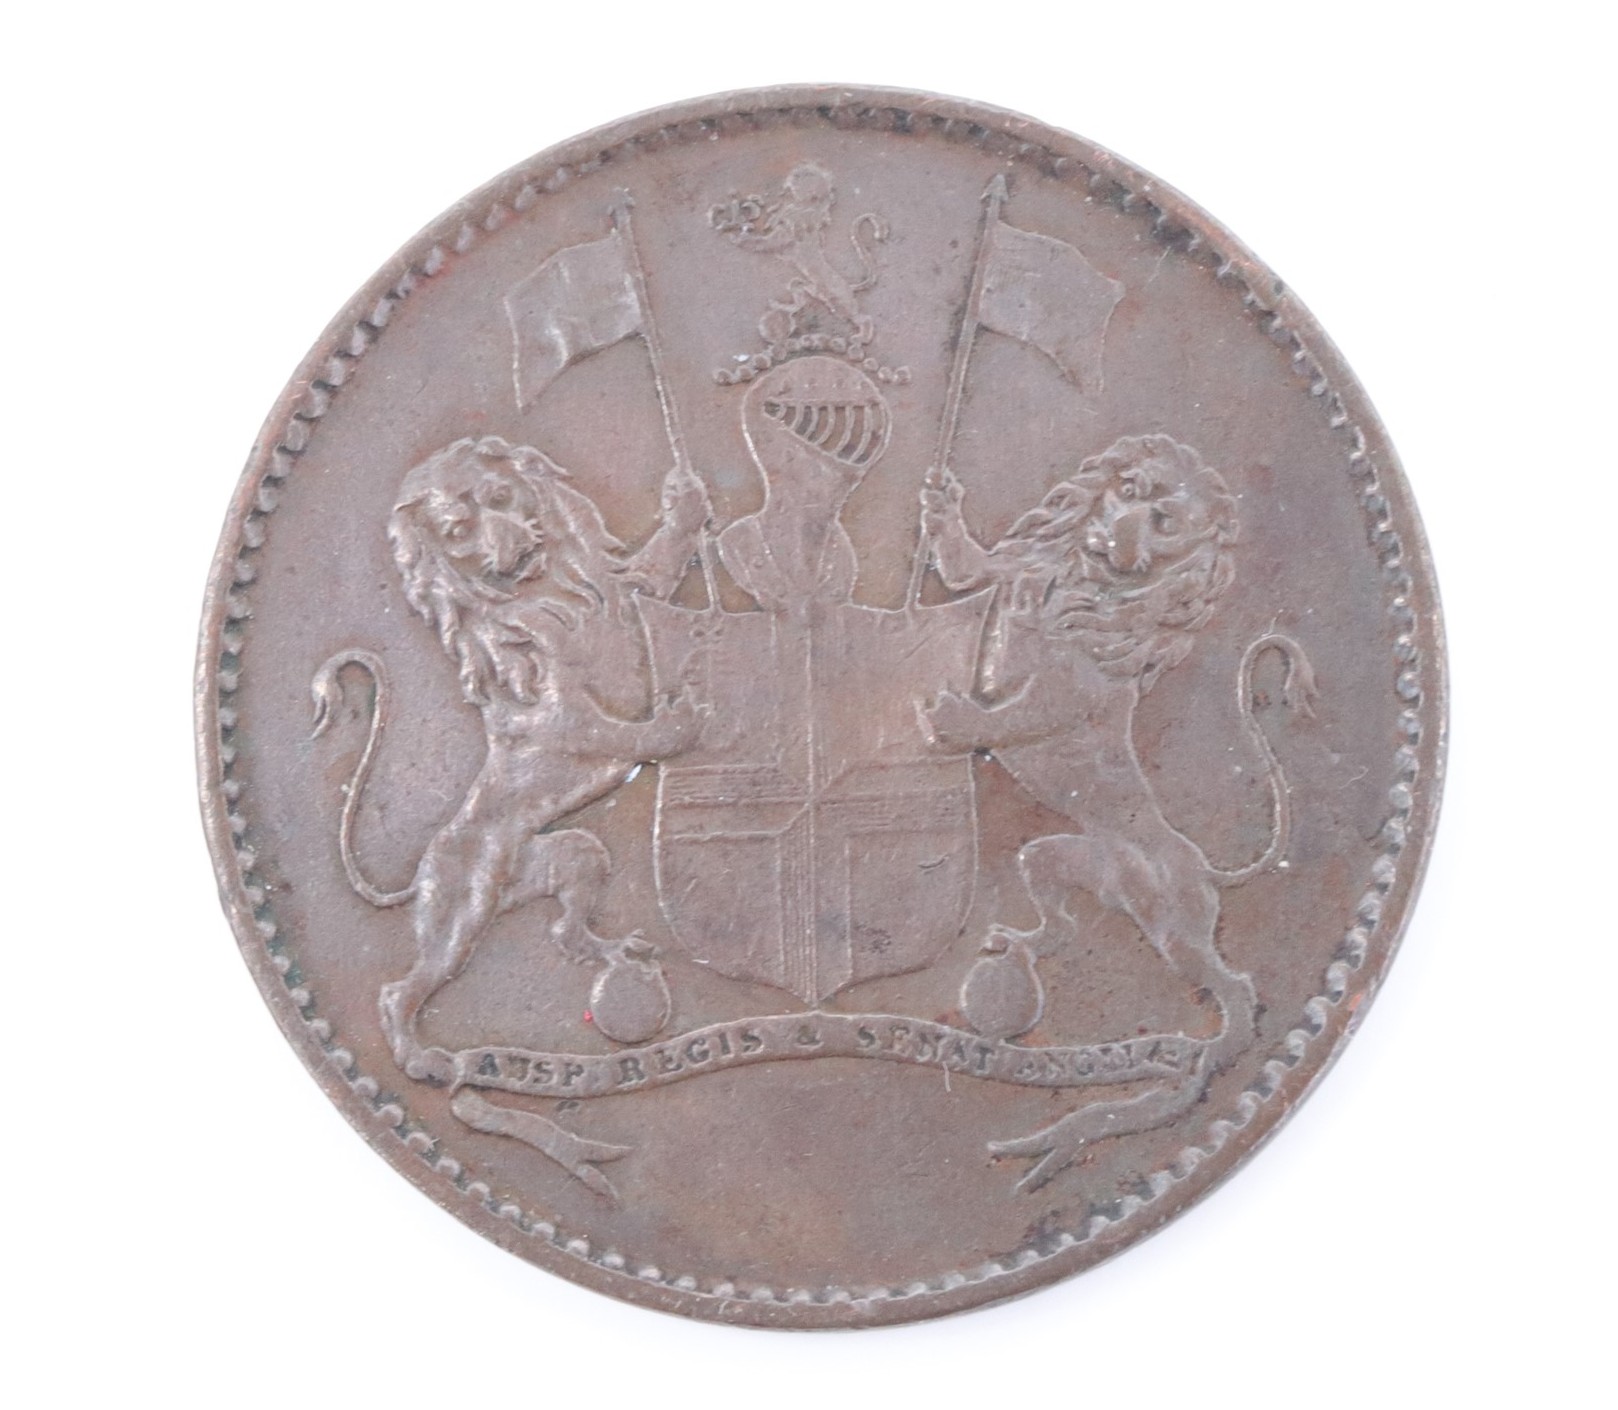 An 1821 St Helena copper half penny coin